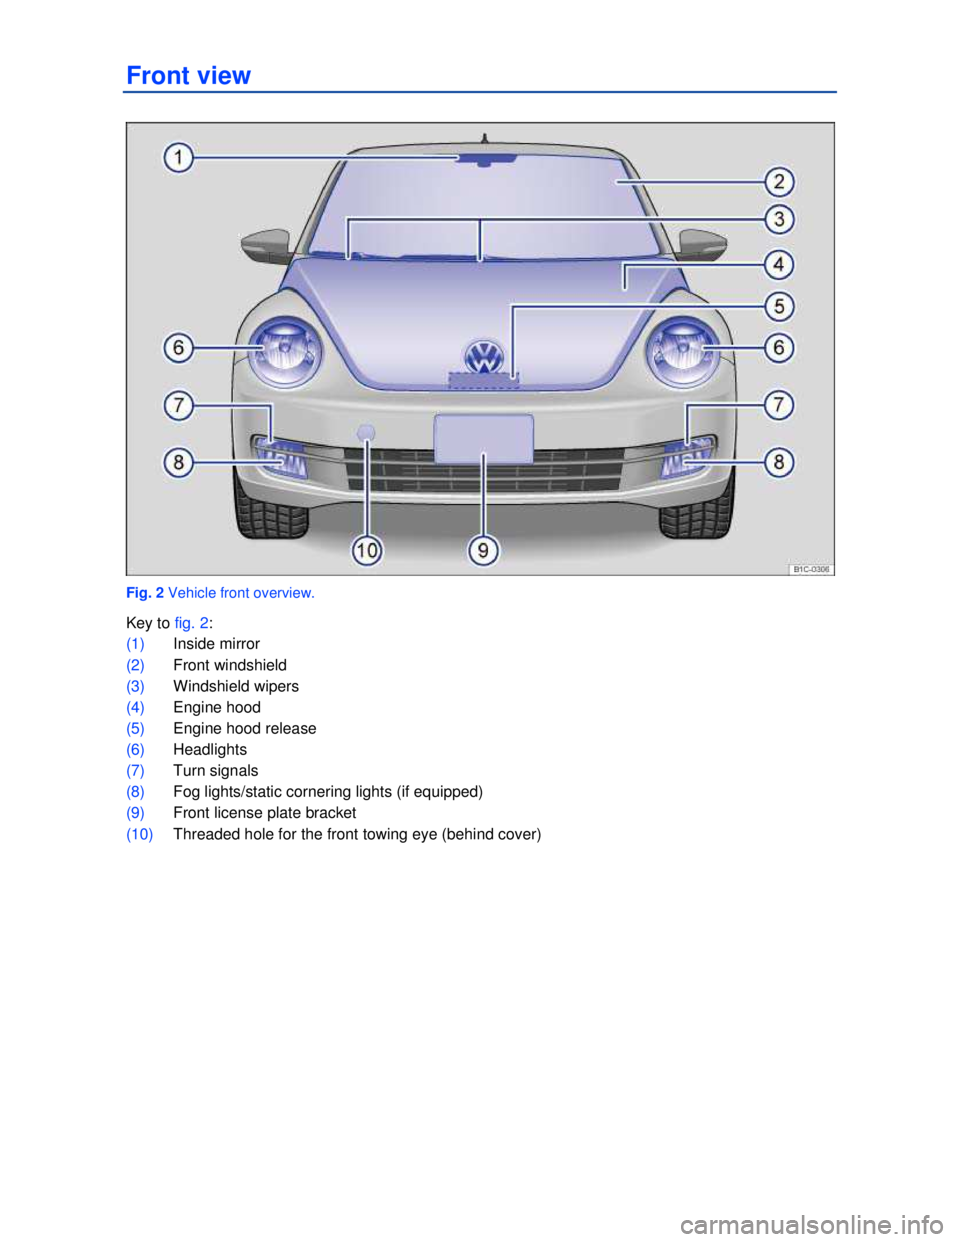 VOLKSWAGEN BEETLE 2012  Owners Manual  
Front view 
 
Fig. 2 Vehicle front overview. 
Key to fig. 2: 
(1) Inside mirror  
(2) Front windshield 
(3) Windshield wipers  
(4) Engine hood  
(5) Engine hood release  
(6) Headlights  
(7) Turn 